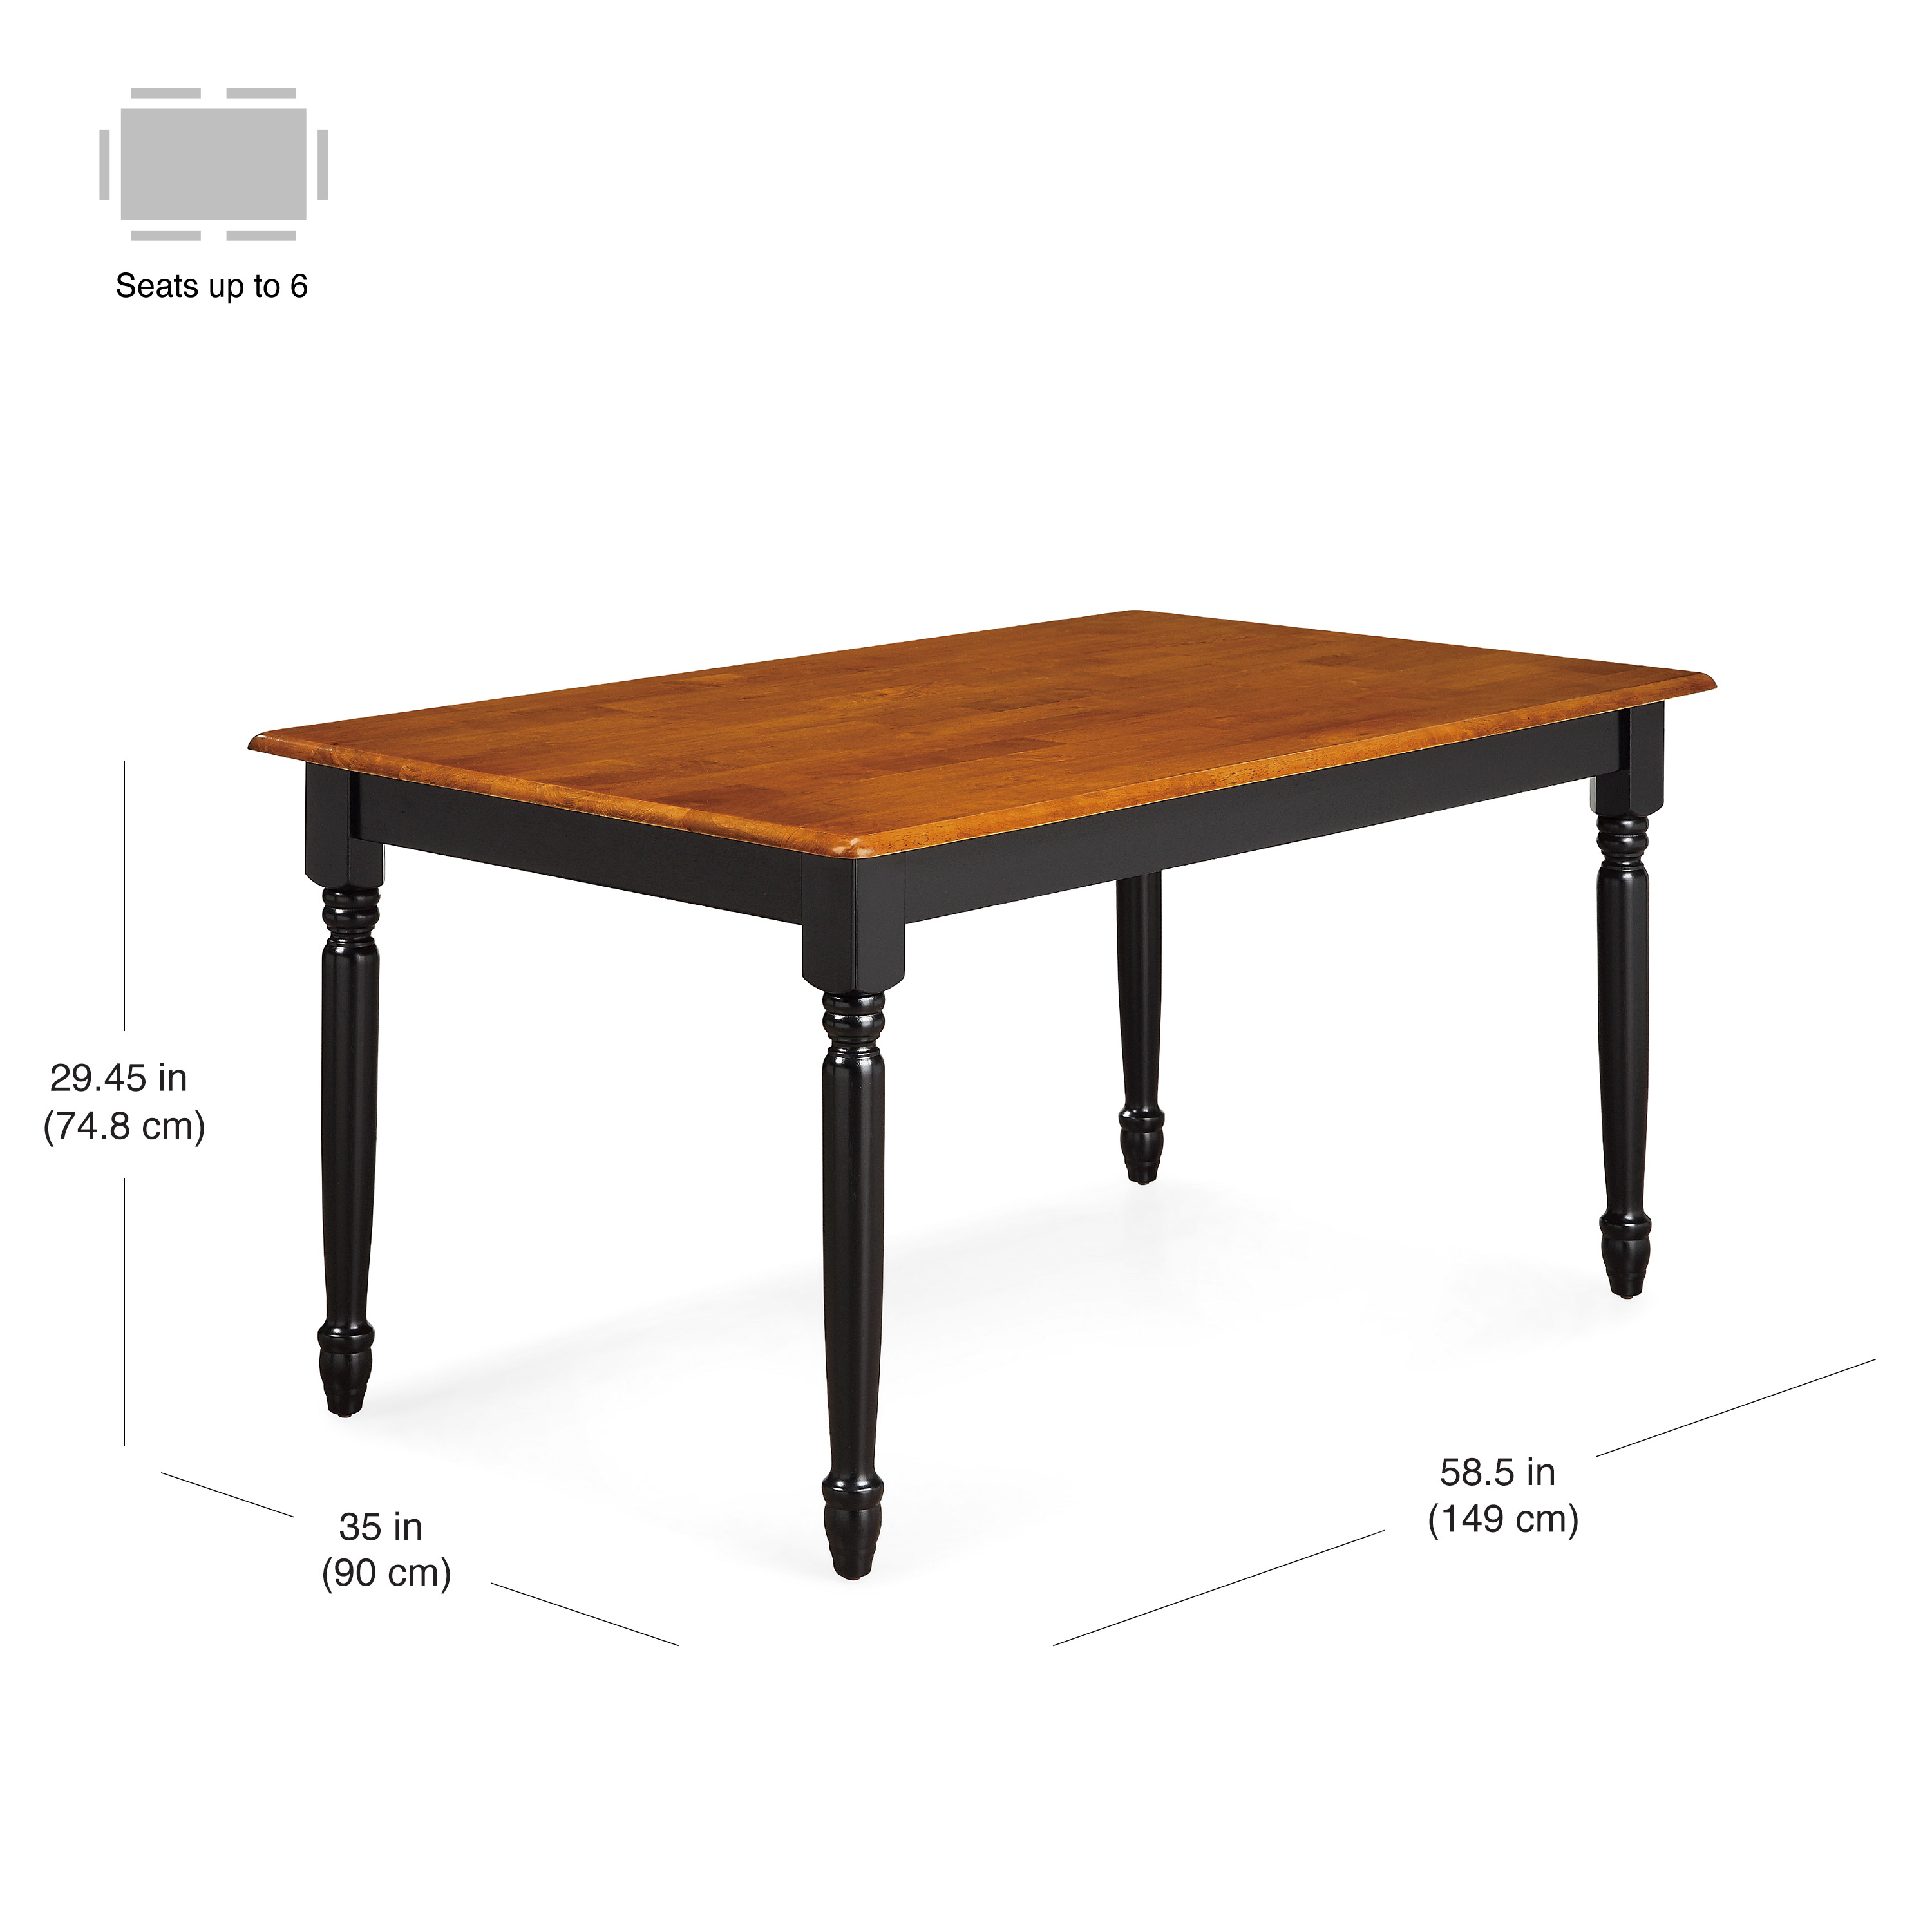 Better Homes and Gardens Autumn Lane Farmhouse Dining Table, Black and Oak - image 2 of 8